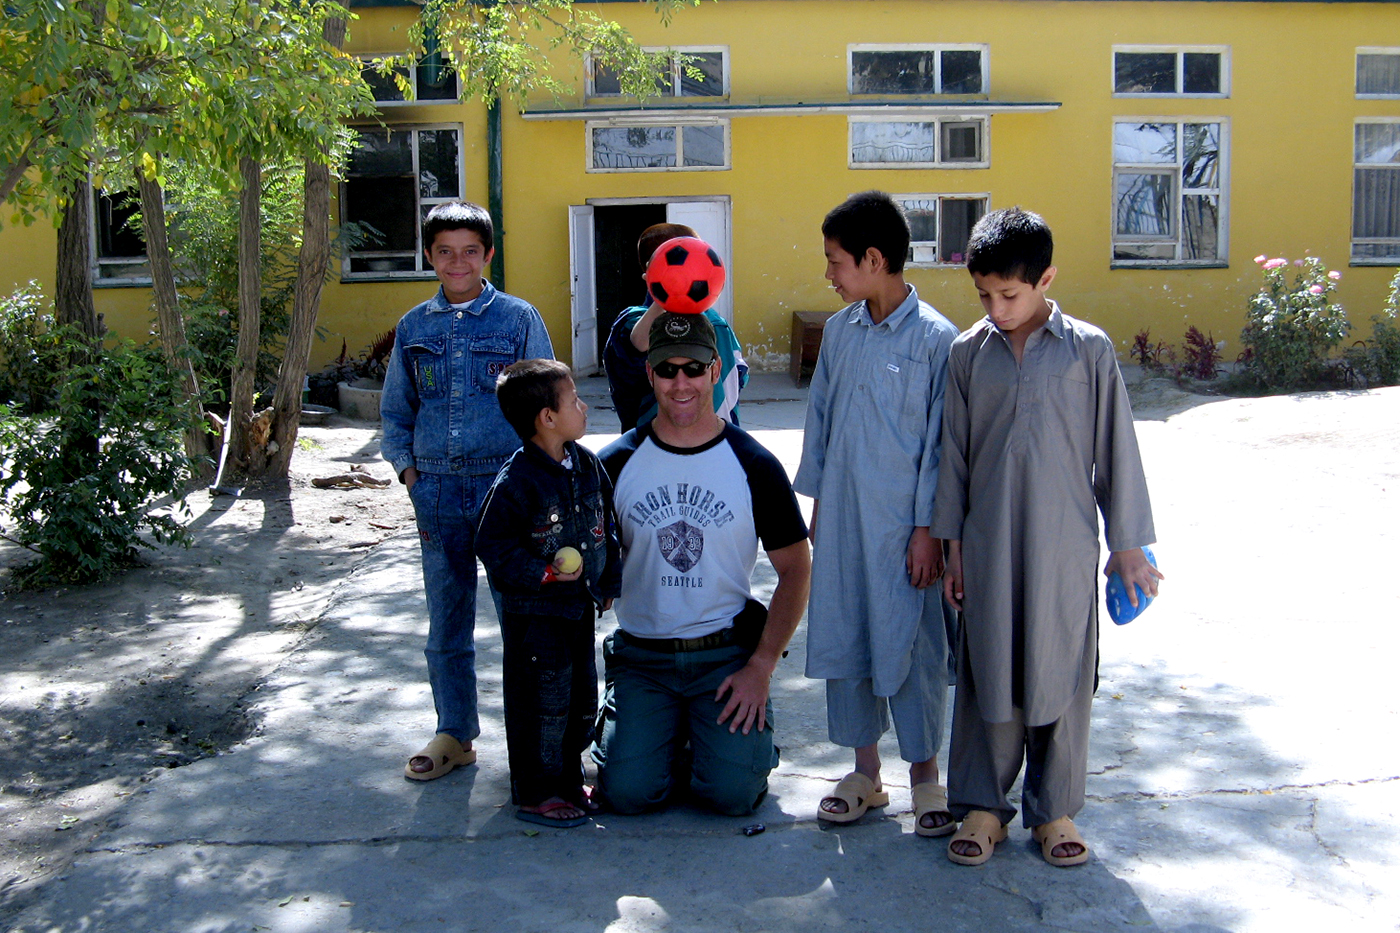 Phil McTigue visits the Kufa Orphanage in Kabul where in 2007 he and his wife delivered more than half a ton of supplies they had collected from family and friends including balls, games, musical instruments, winter accessories and quilts.